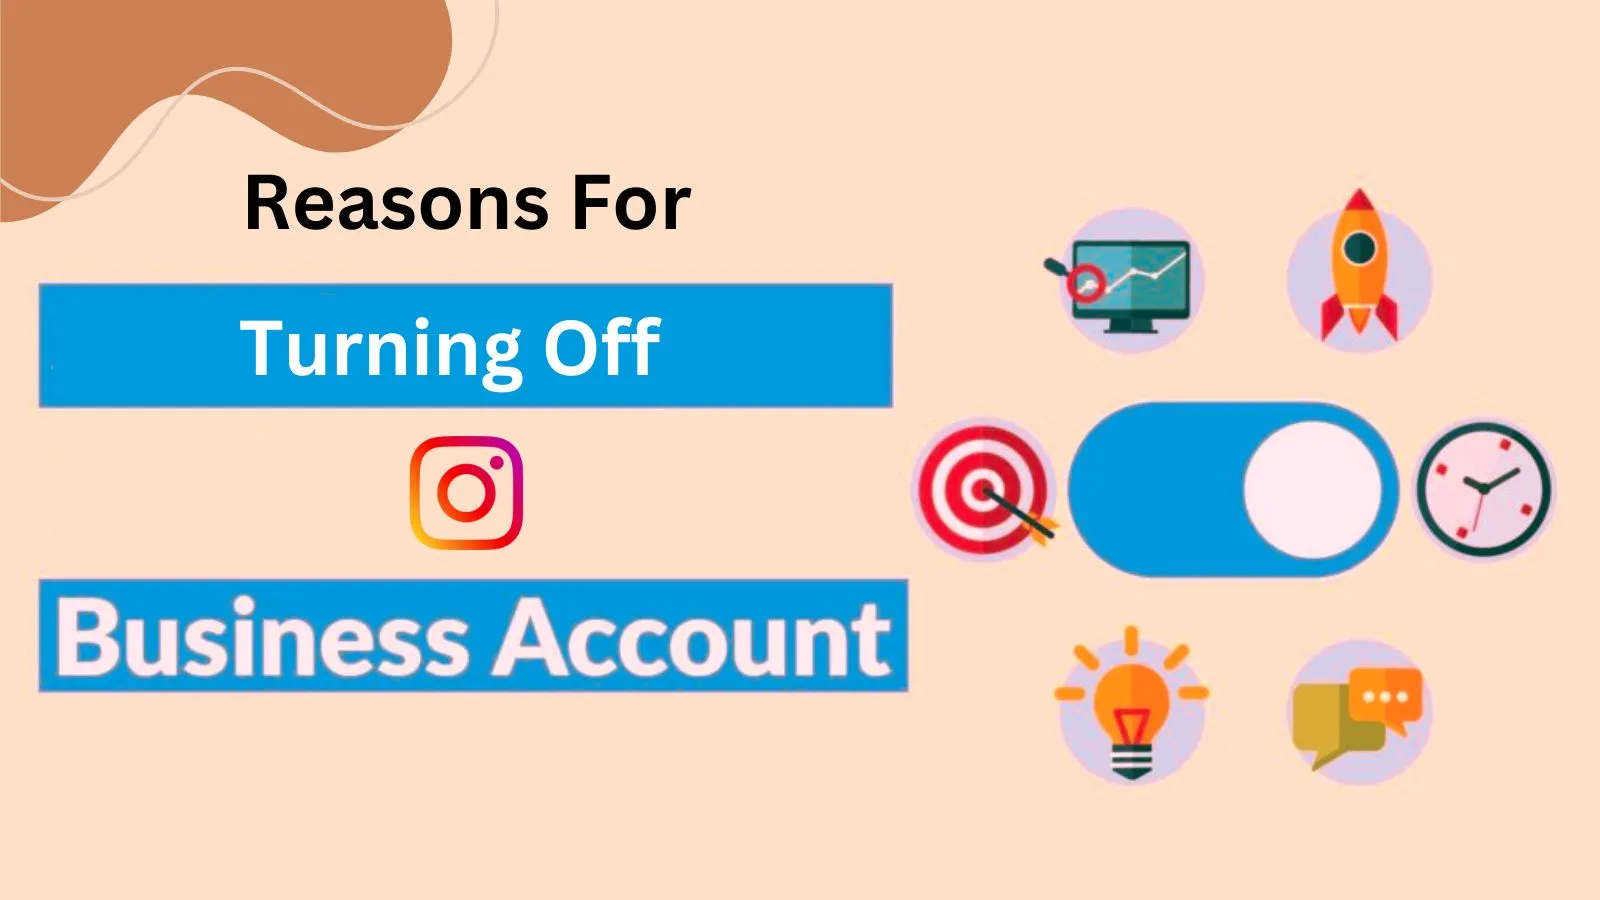 possible-reasons-for-turning-off-a-business-account-on-instagram